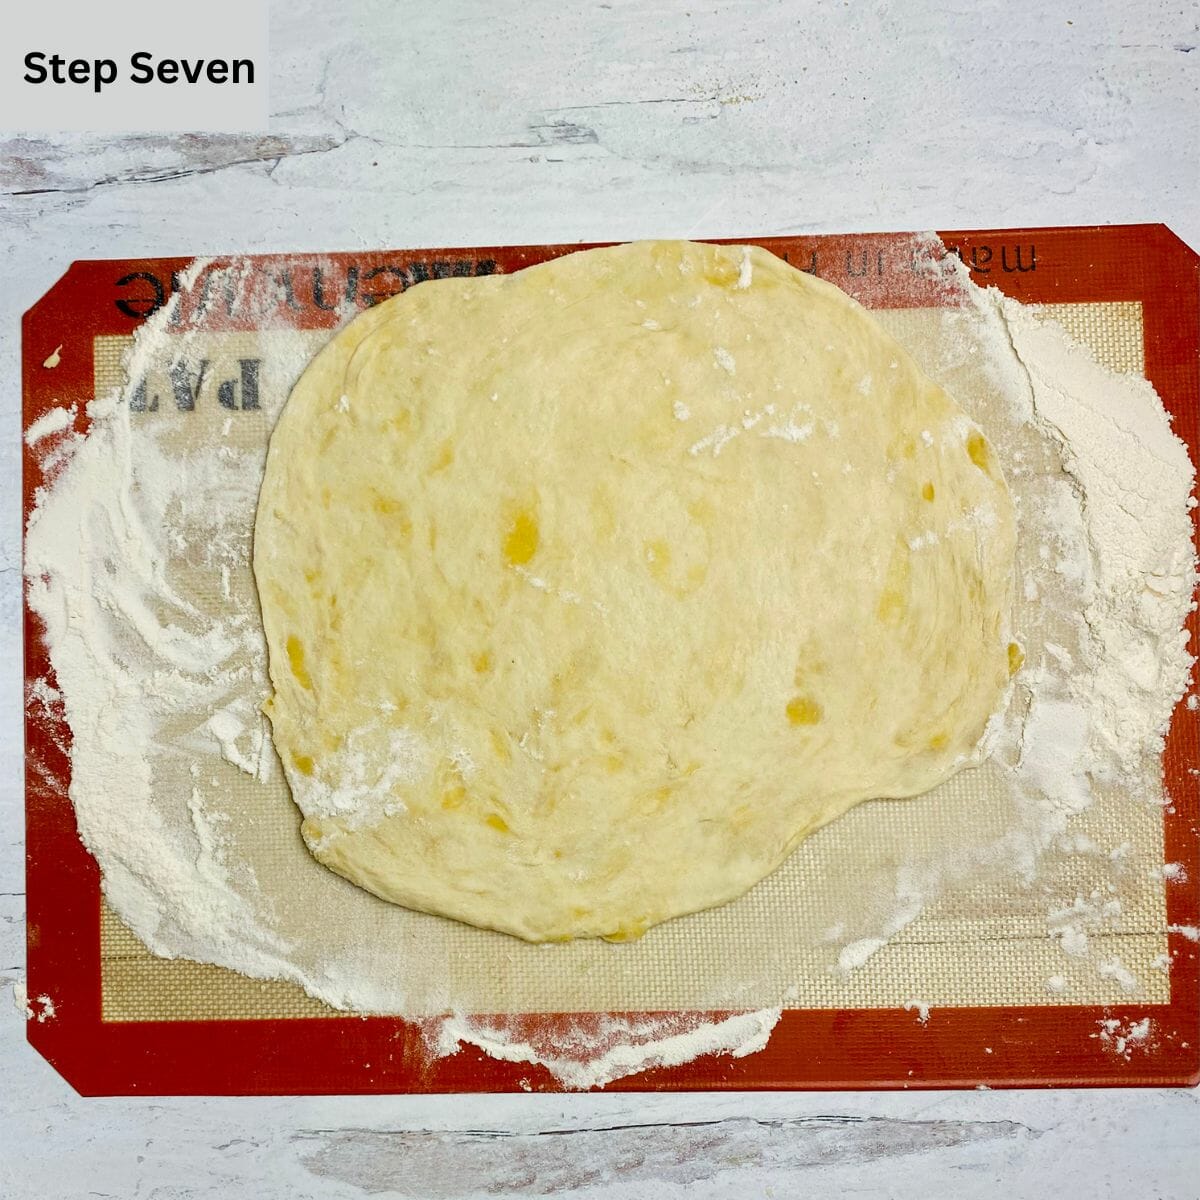 Rolled out pizza dough on a silicone mat.